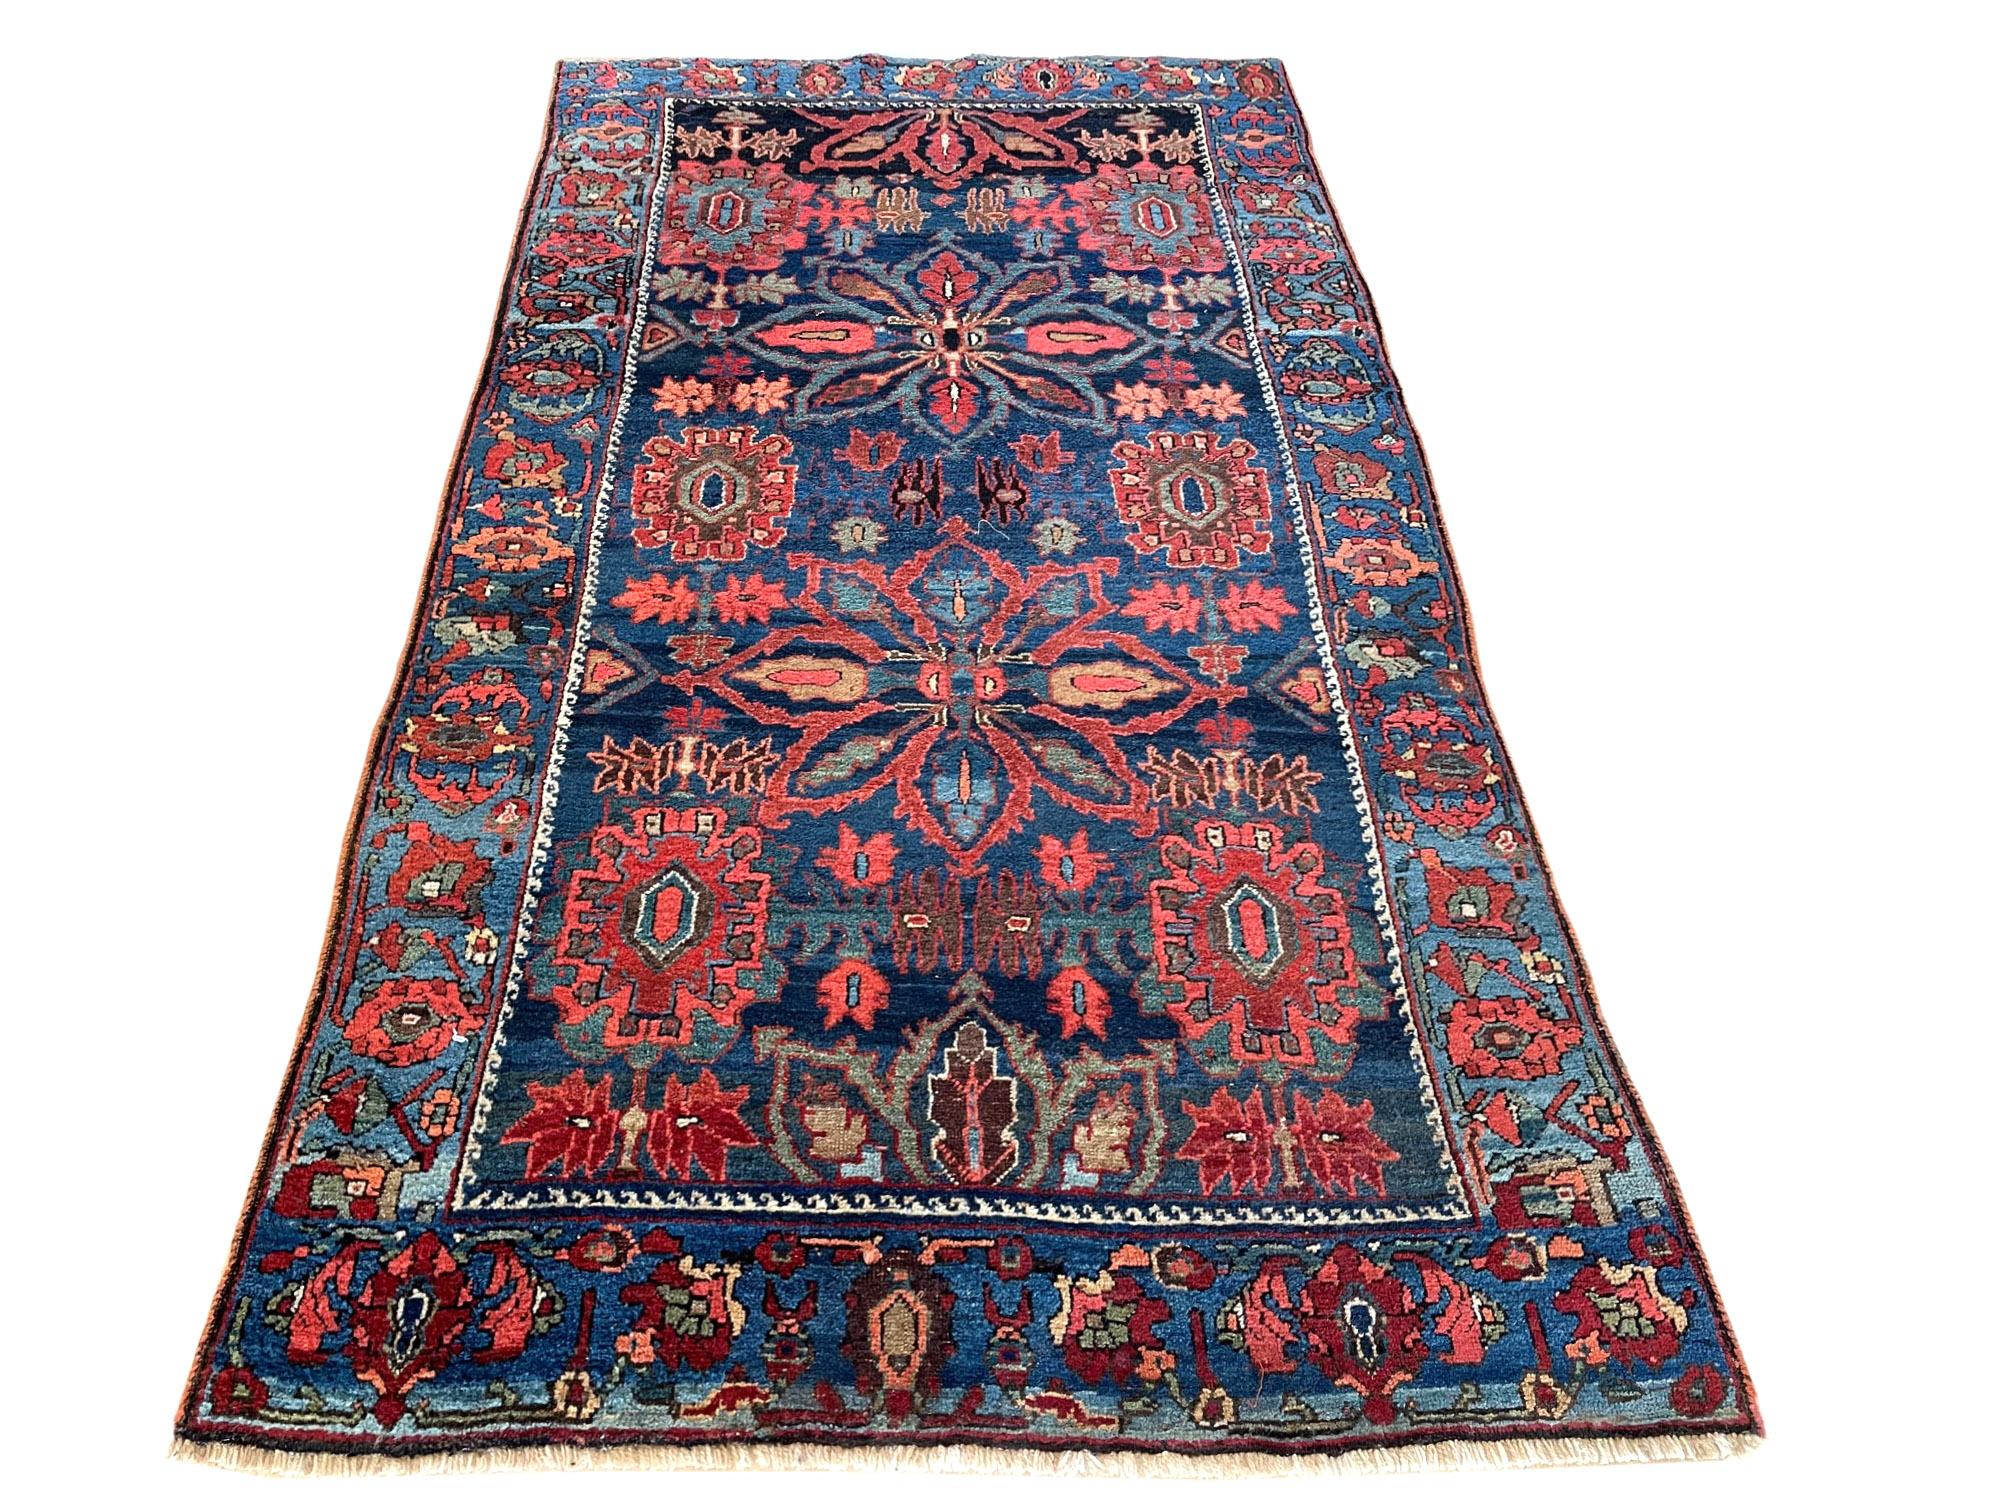 This piece is an antique handmade Persian Bijar rug 1920's circa. Persian Bijar rugs are among the most hardwearing rug. It is made using high-quality wool, and the knots are beaten down using a heavy metal comb to give a tight, dirt-resistant pile.